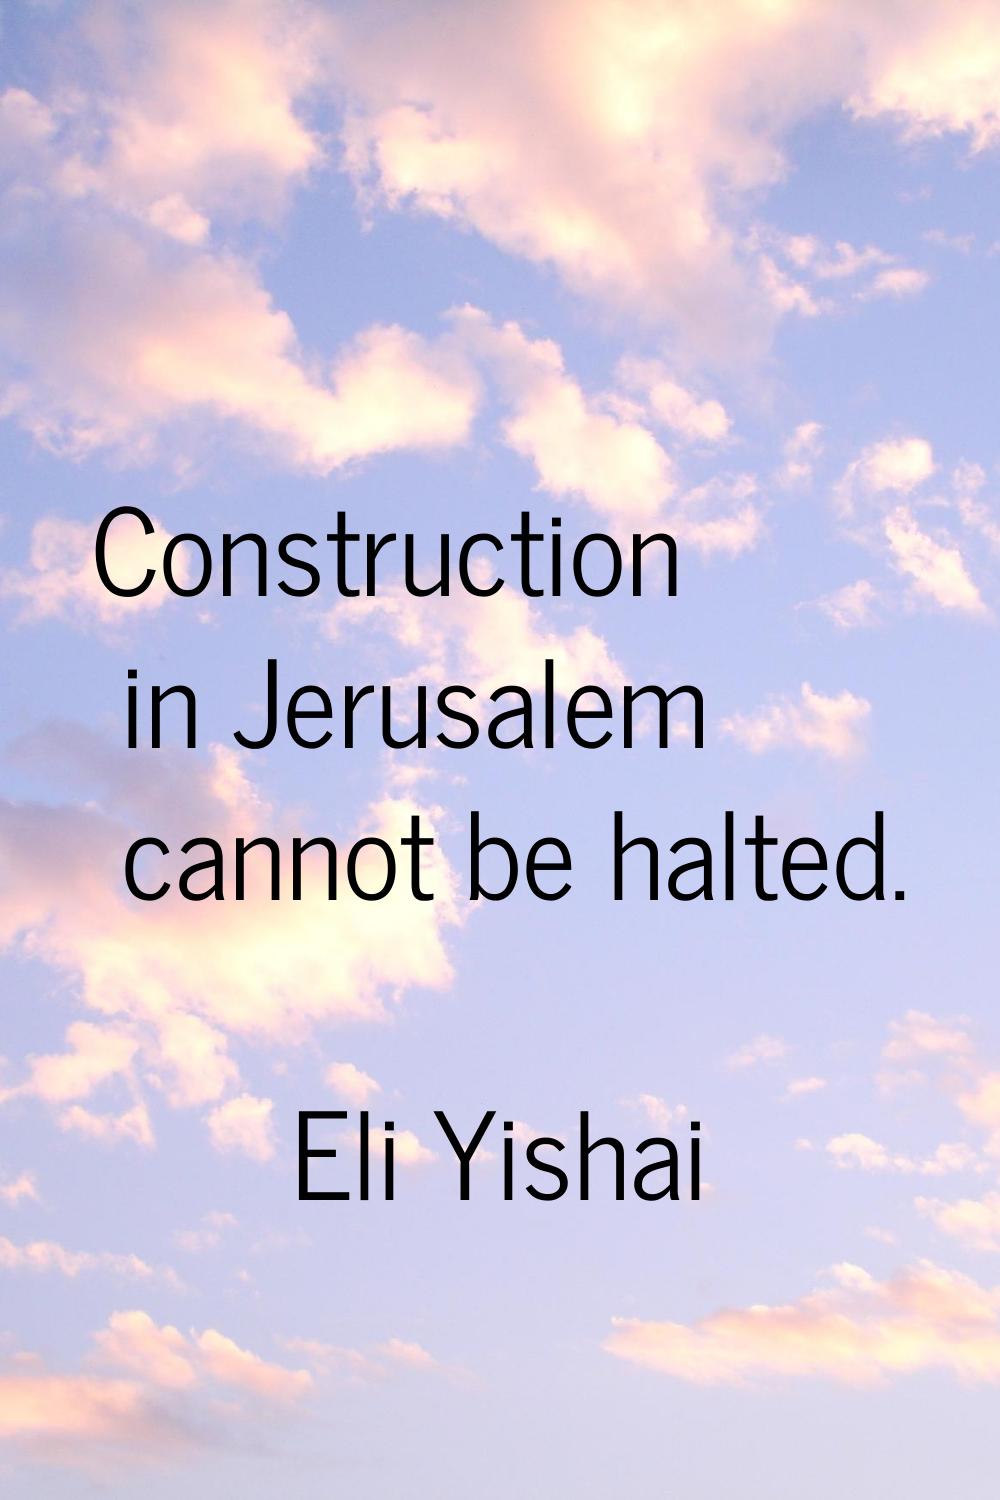 Construction in Jerusalem cannot be halted.